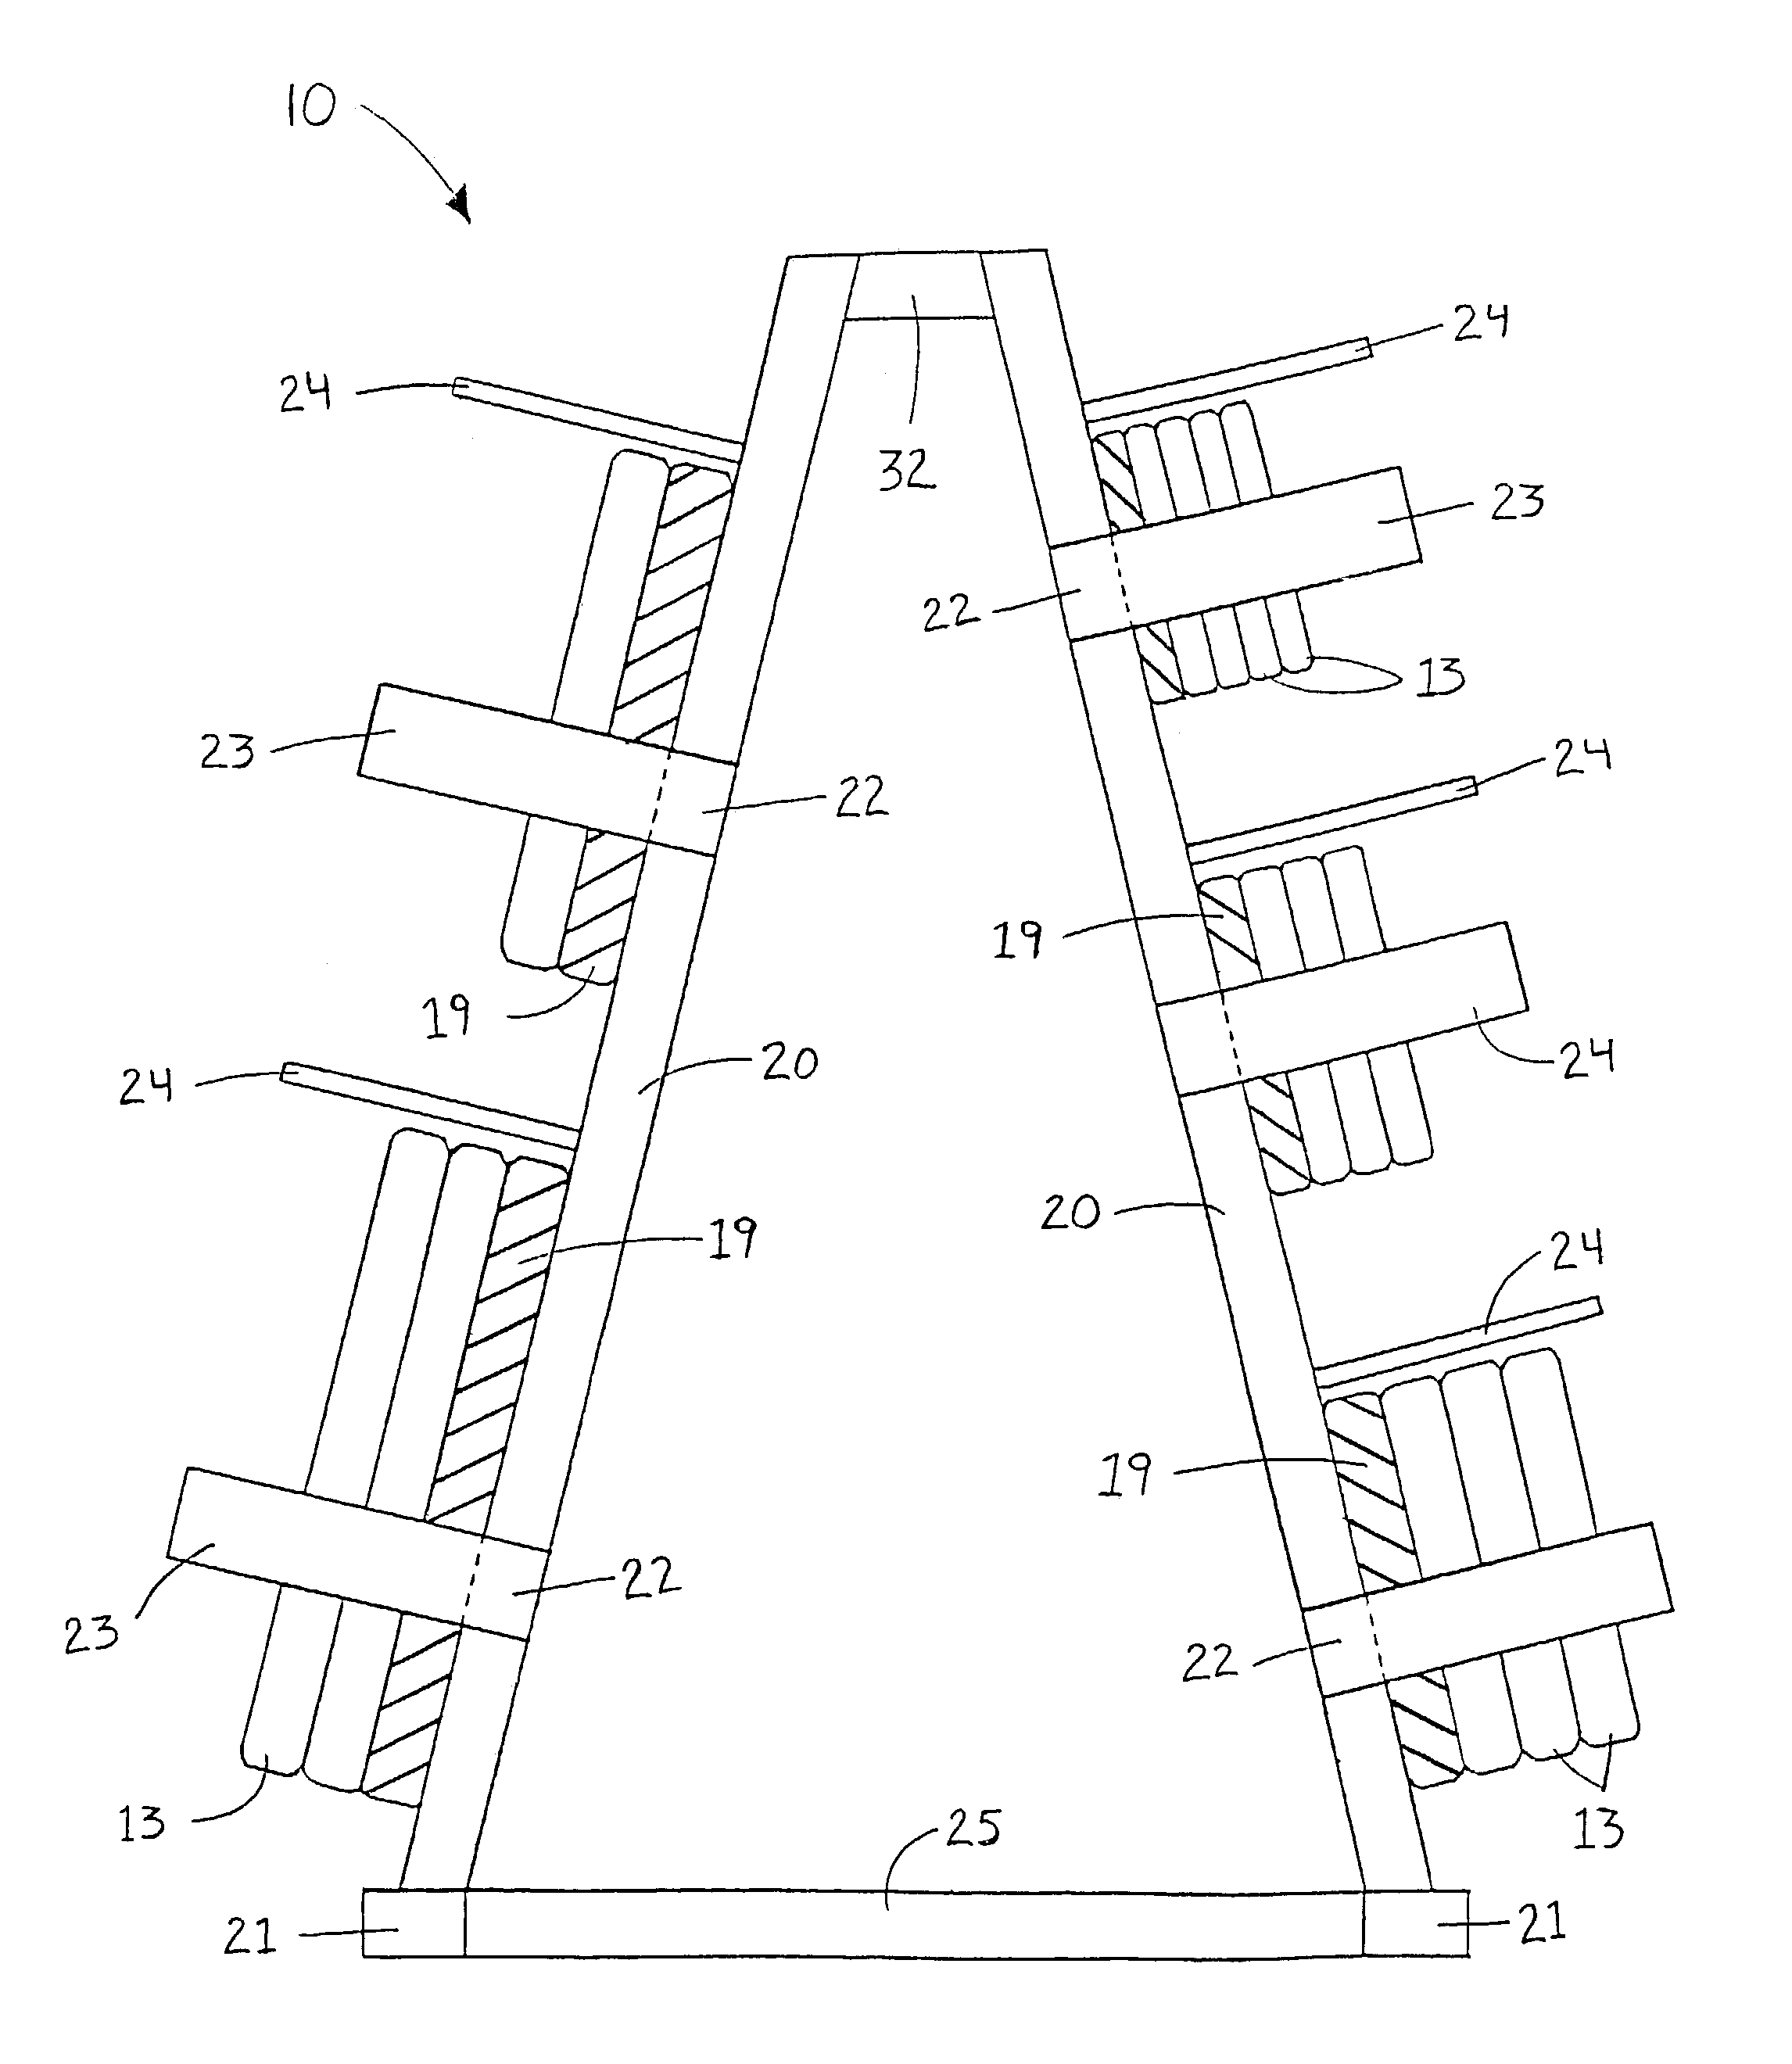 Multi-member support storage implement for plate-like weights